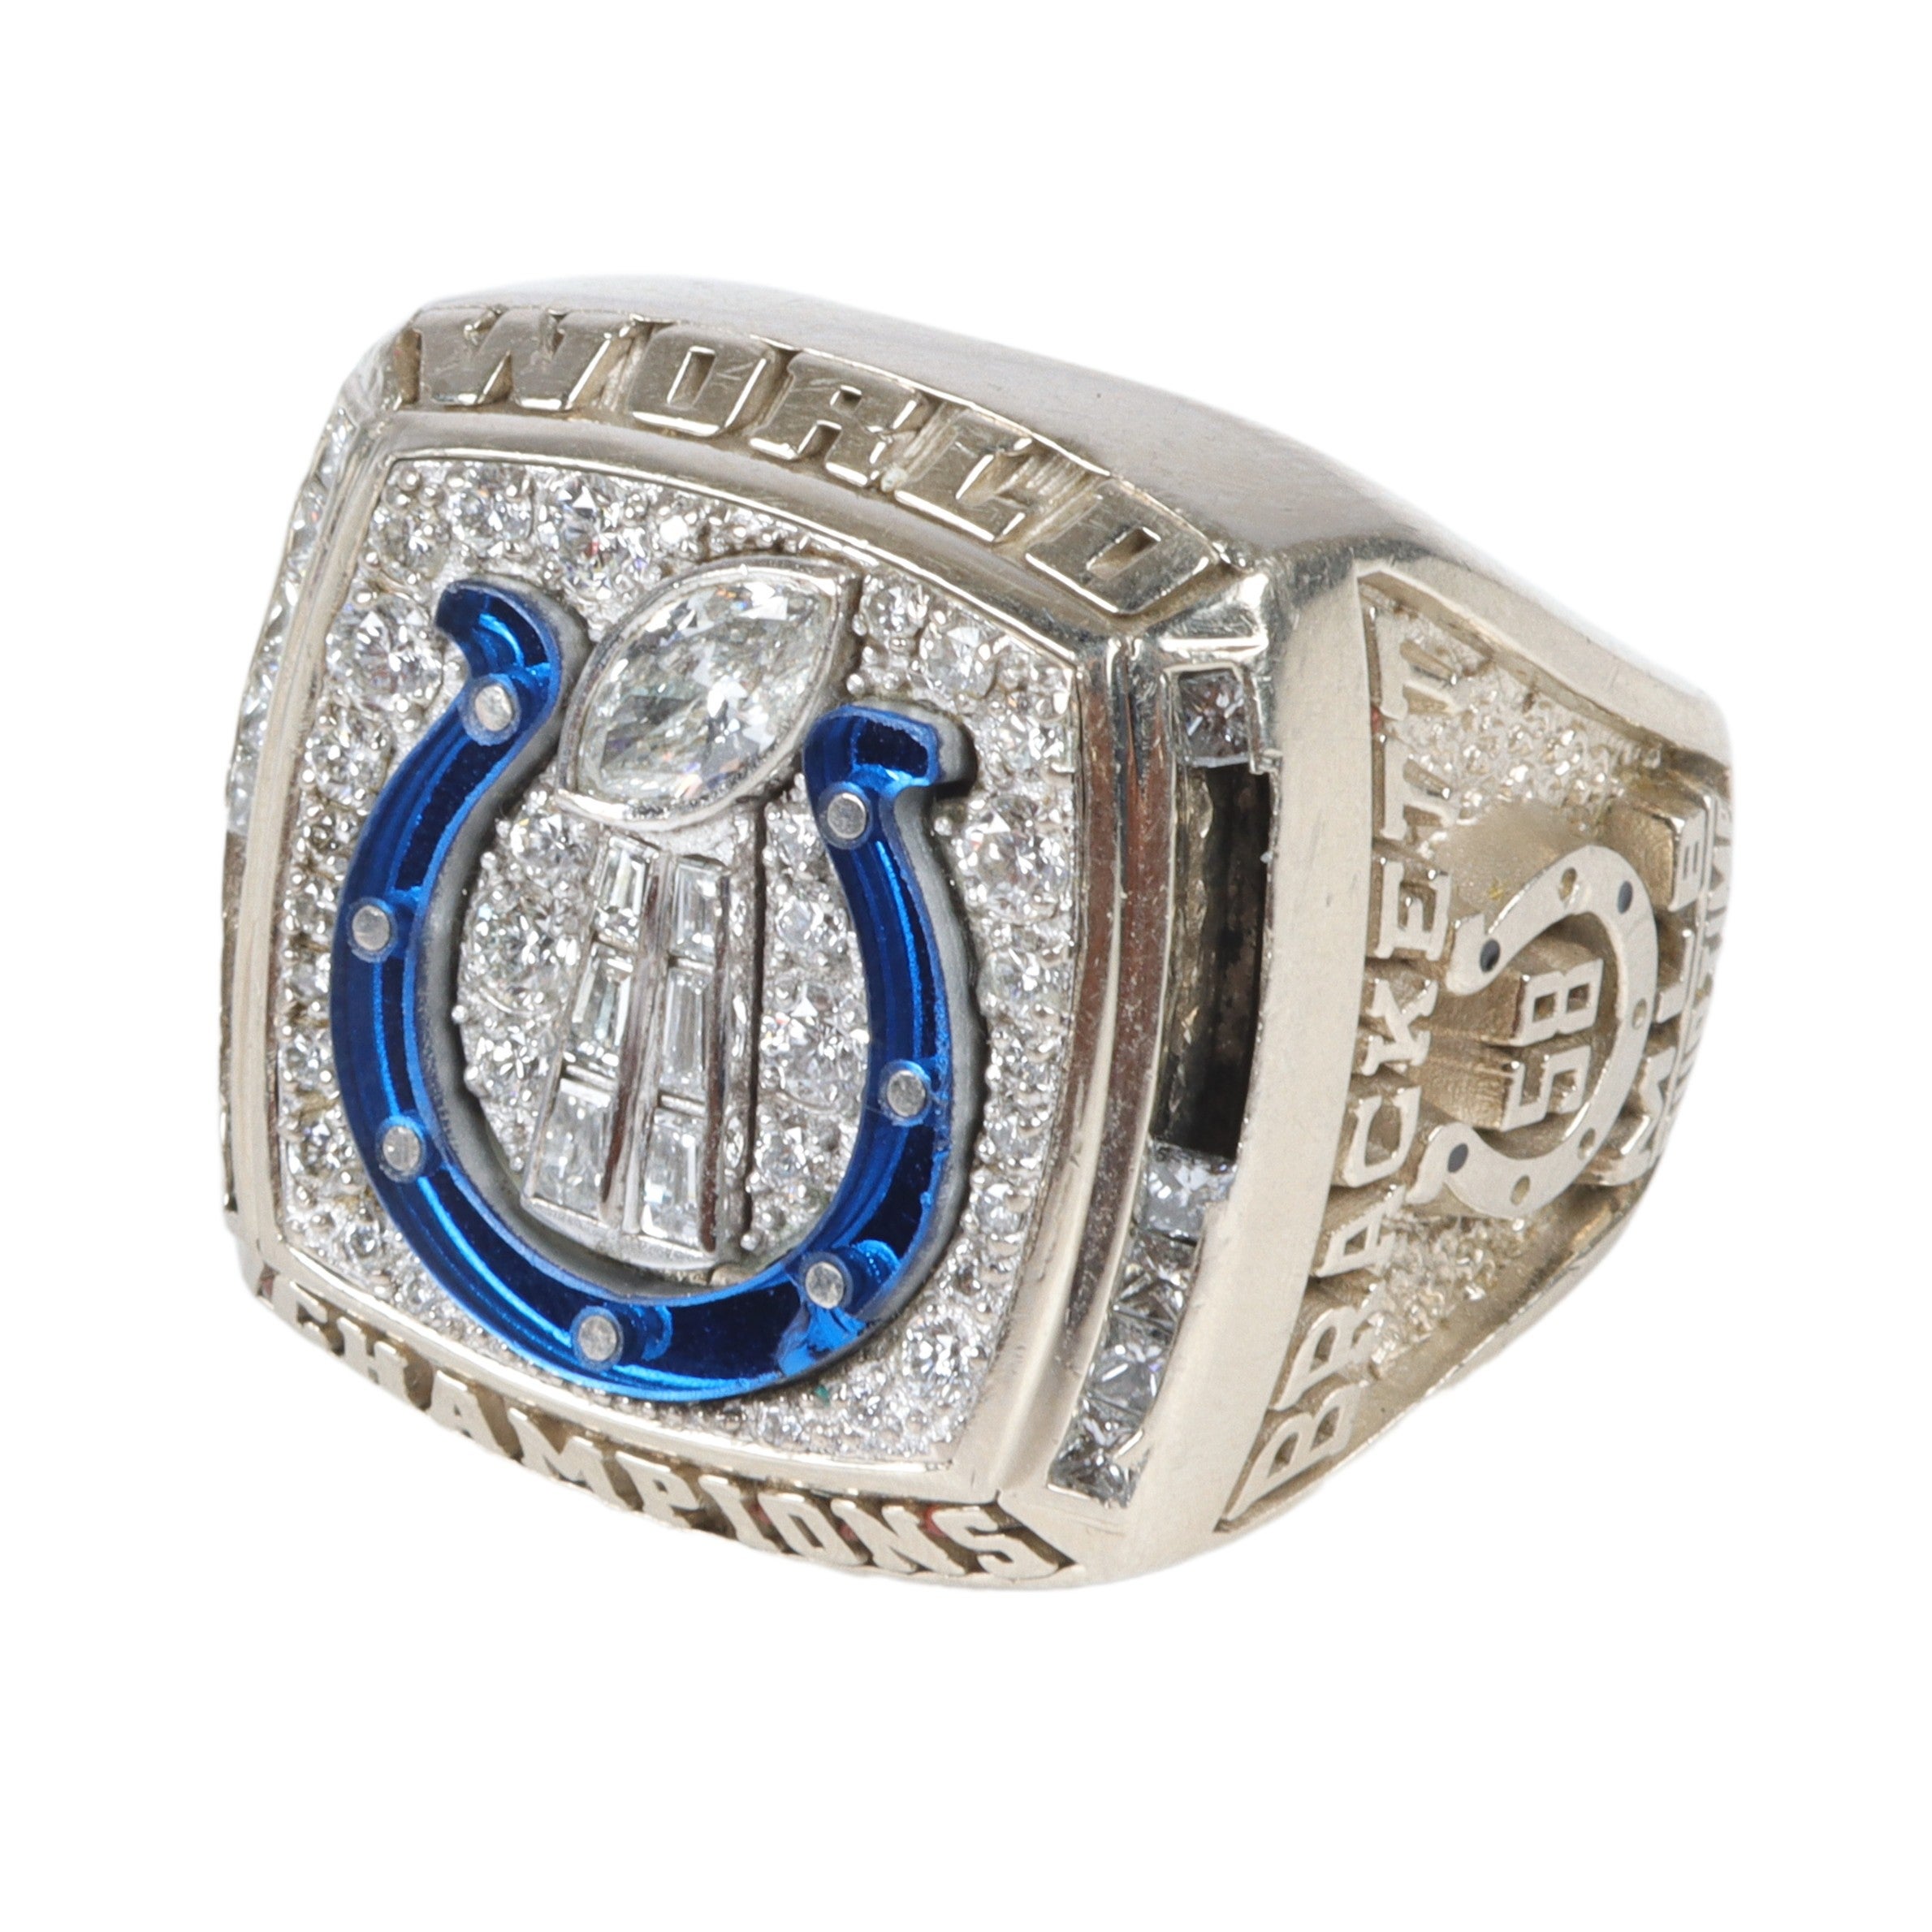 super bowl ring 2021 cost